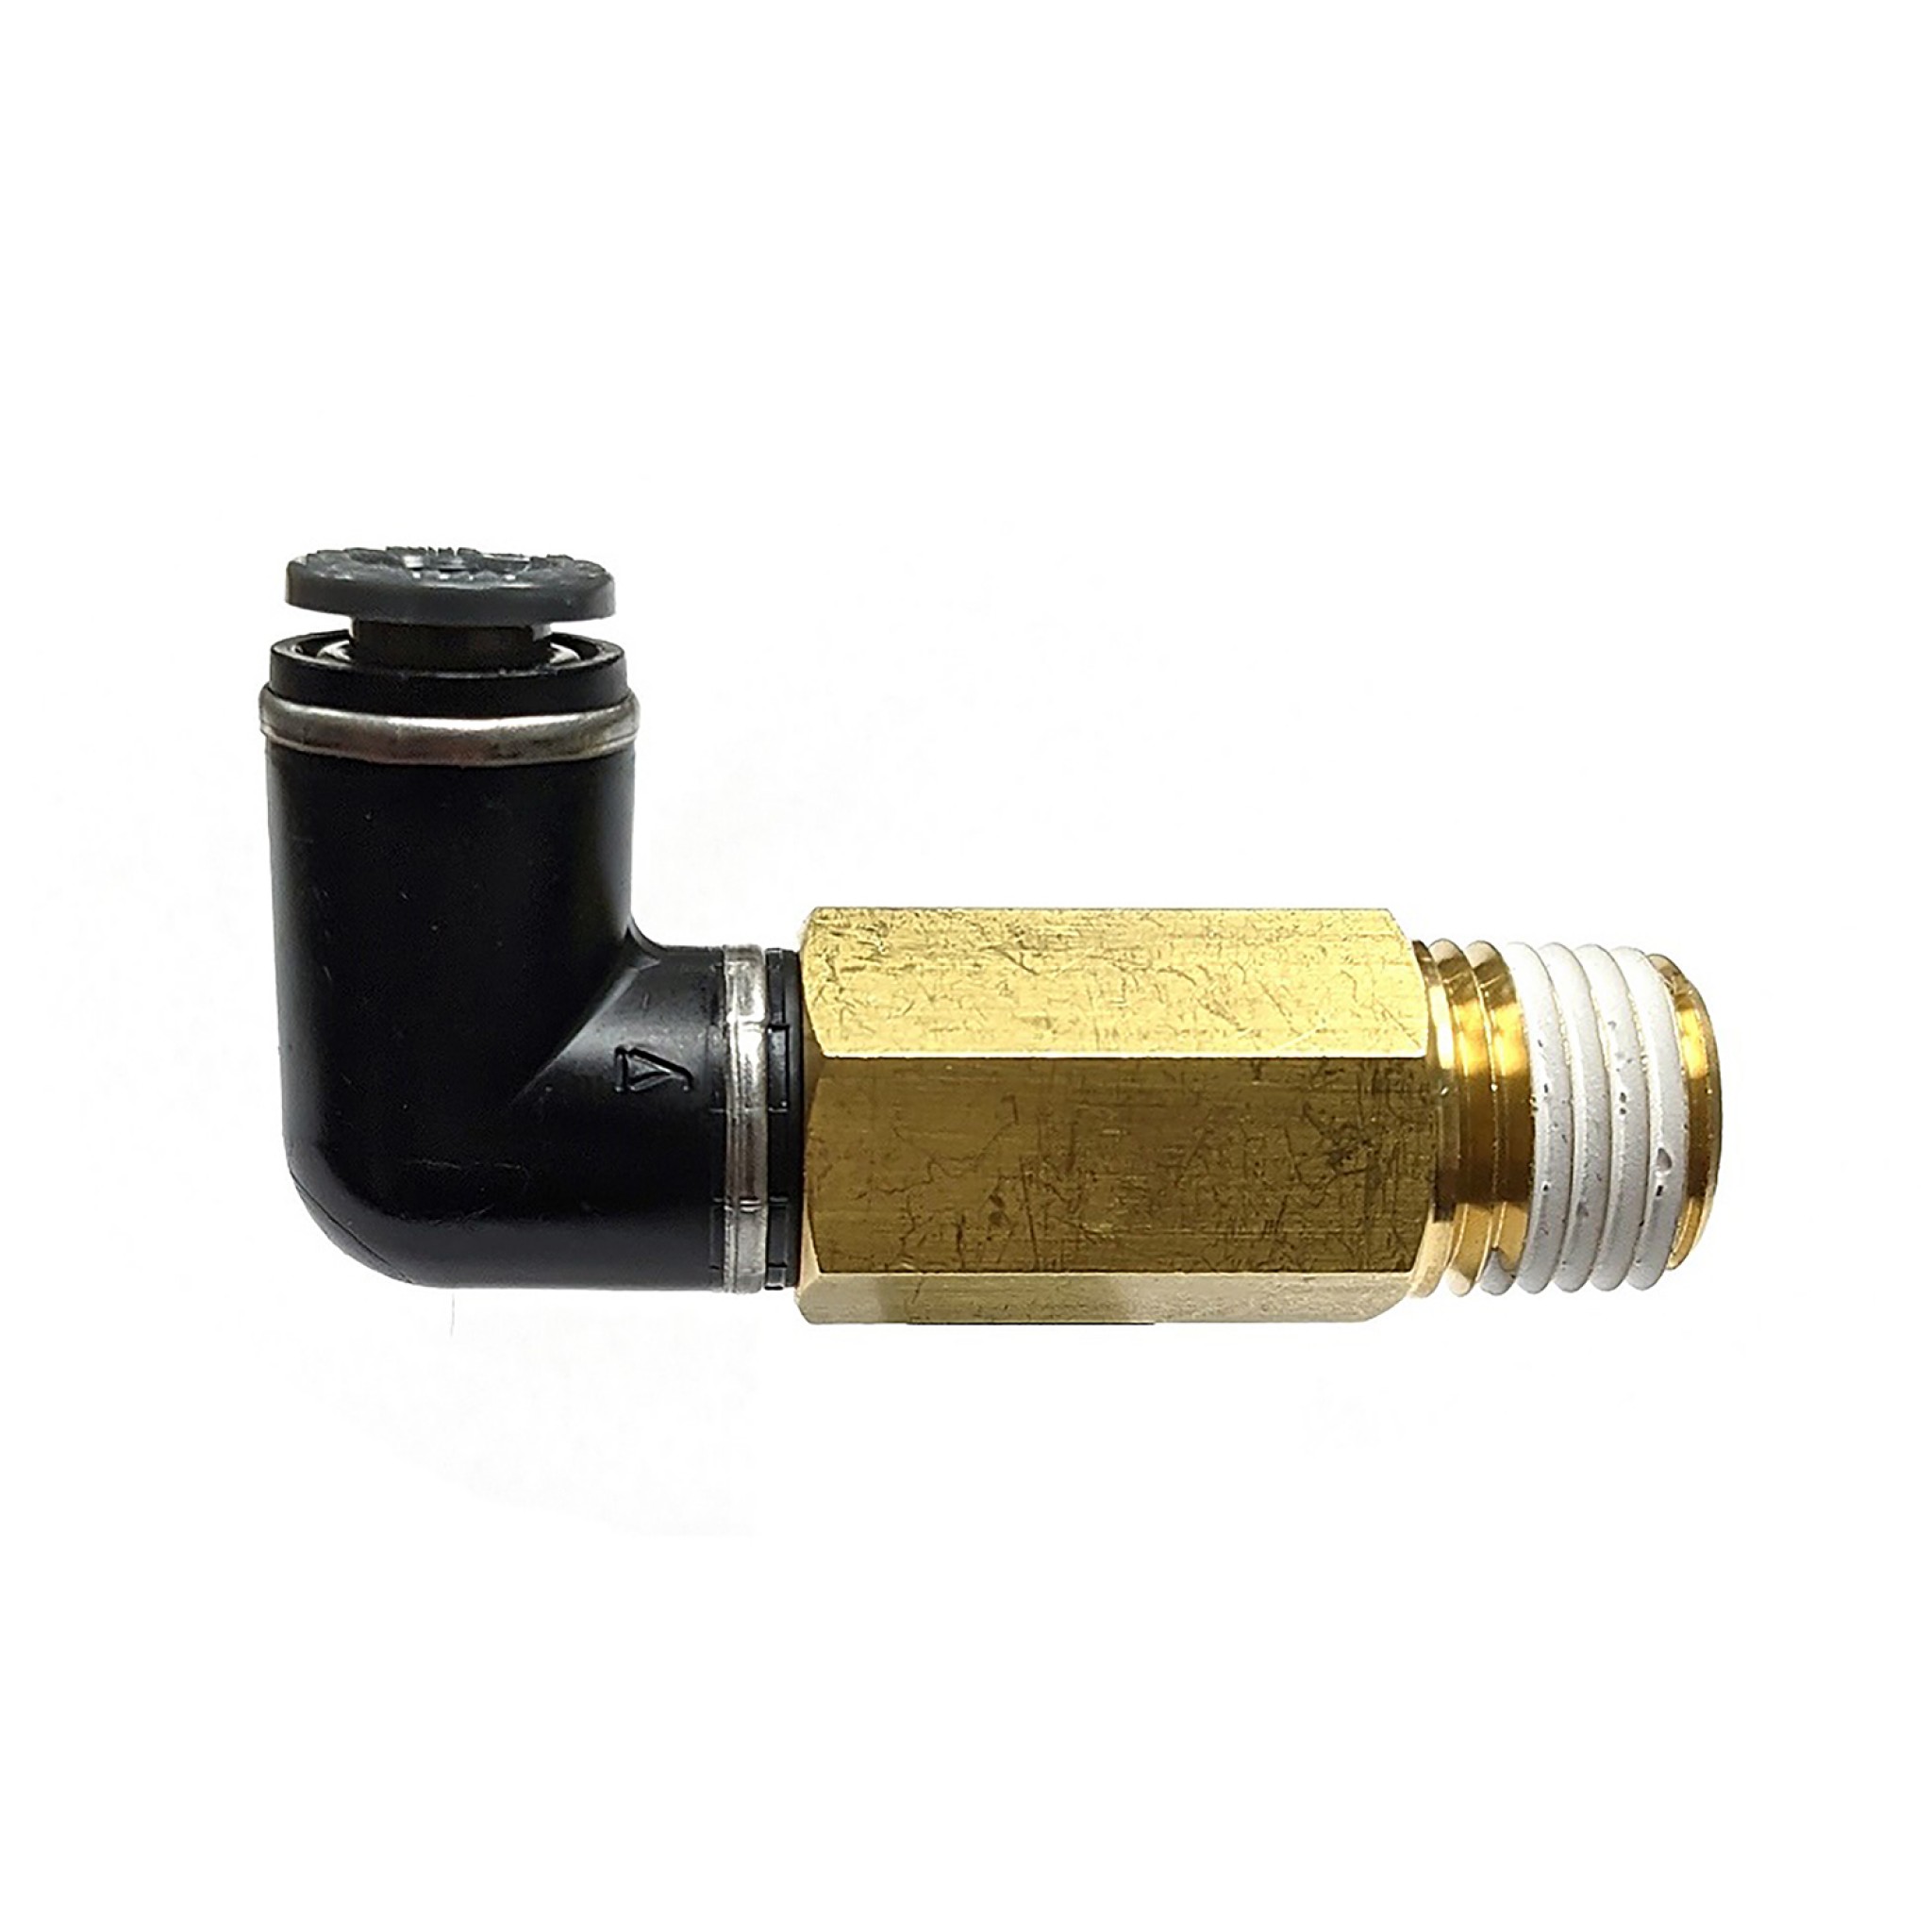 Airline Fitting | Extended Swivel Elbow | 1/4" Male NPT to 1/4" Airline